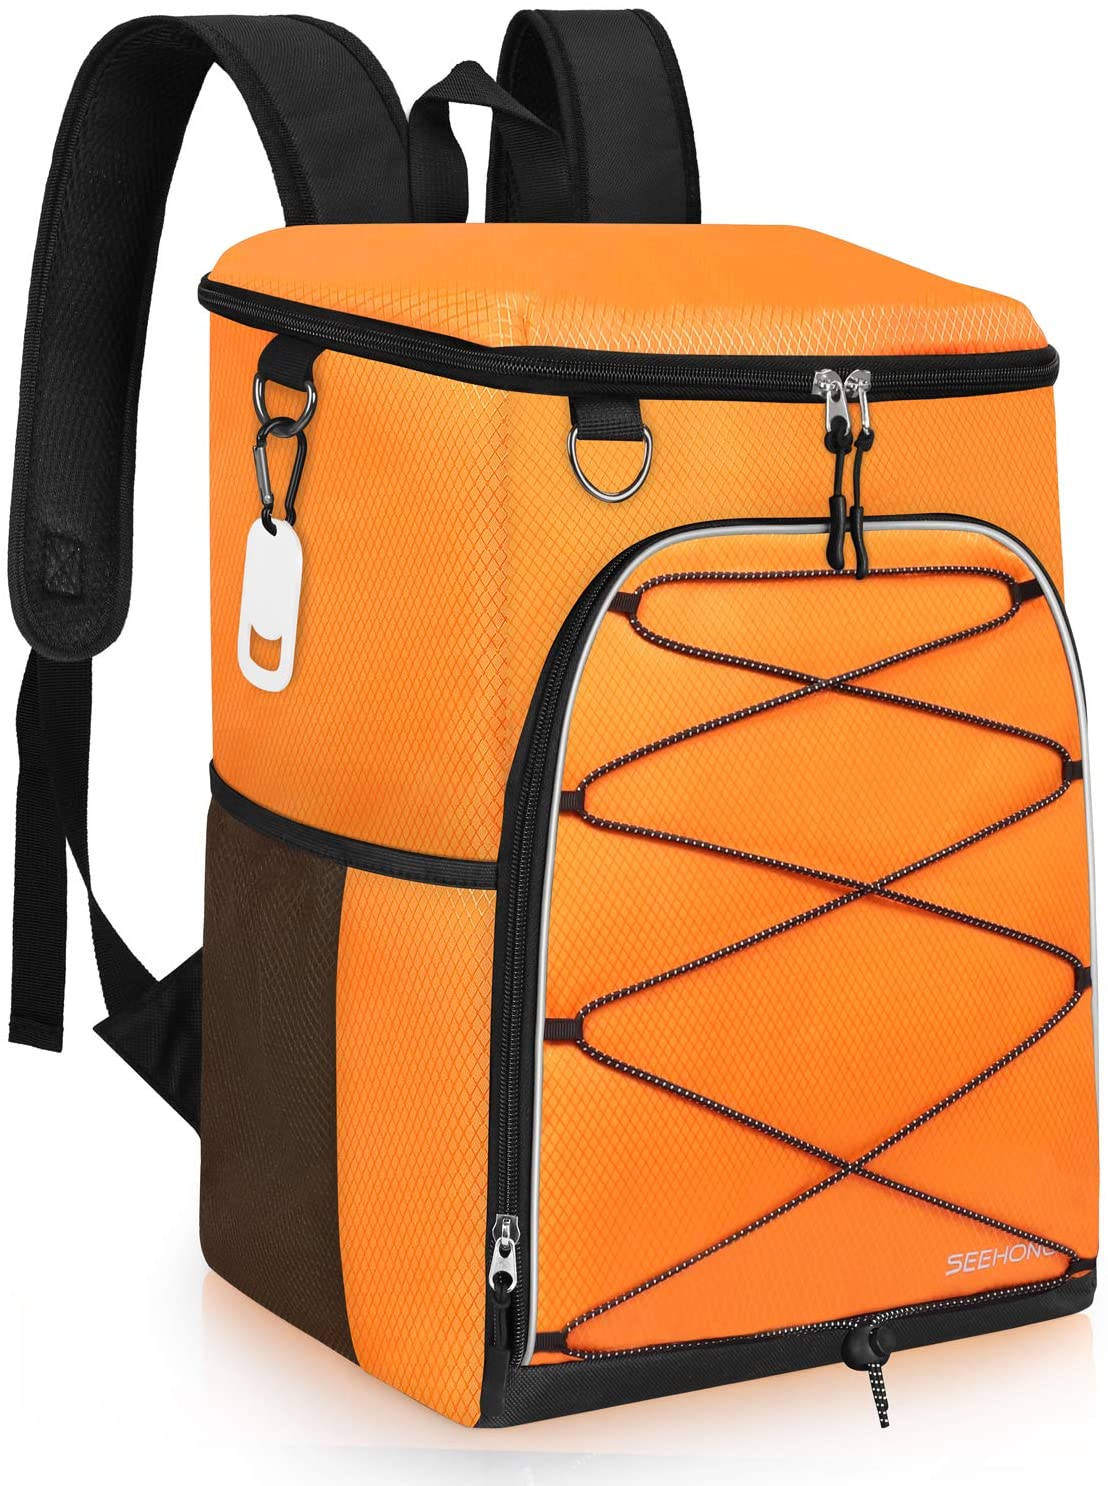 Autumn Fall Dragonfly Cooler Backpack Waterproof Backpack Cooler Insulated